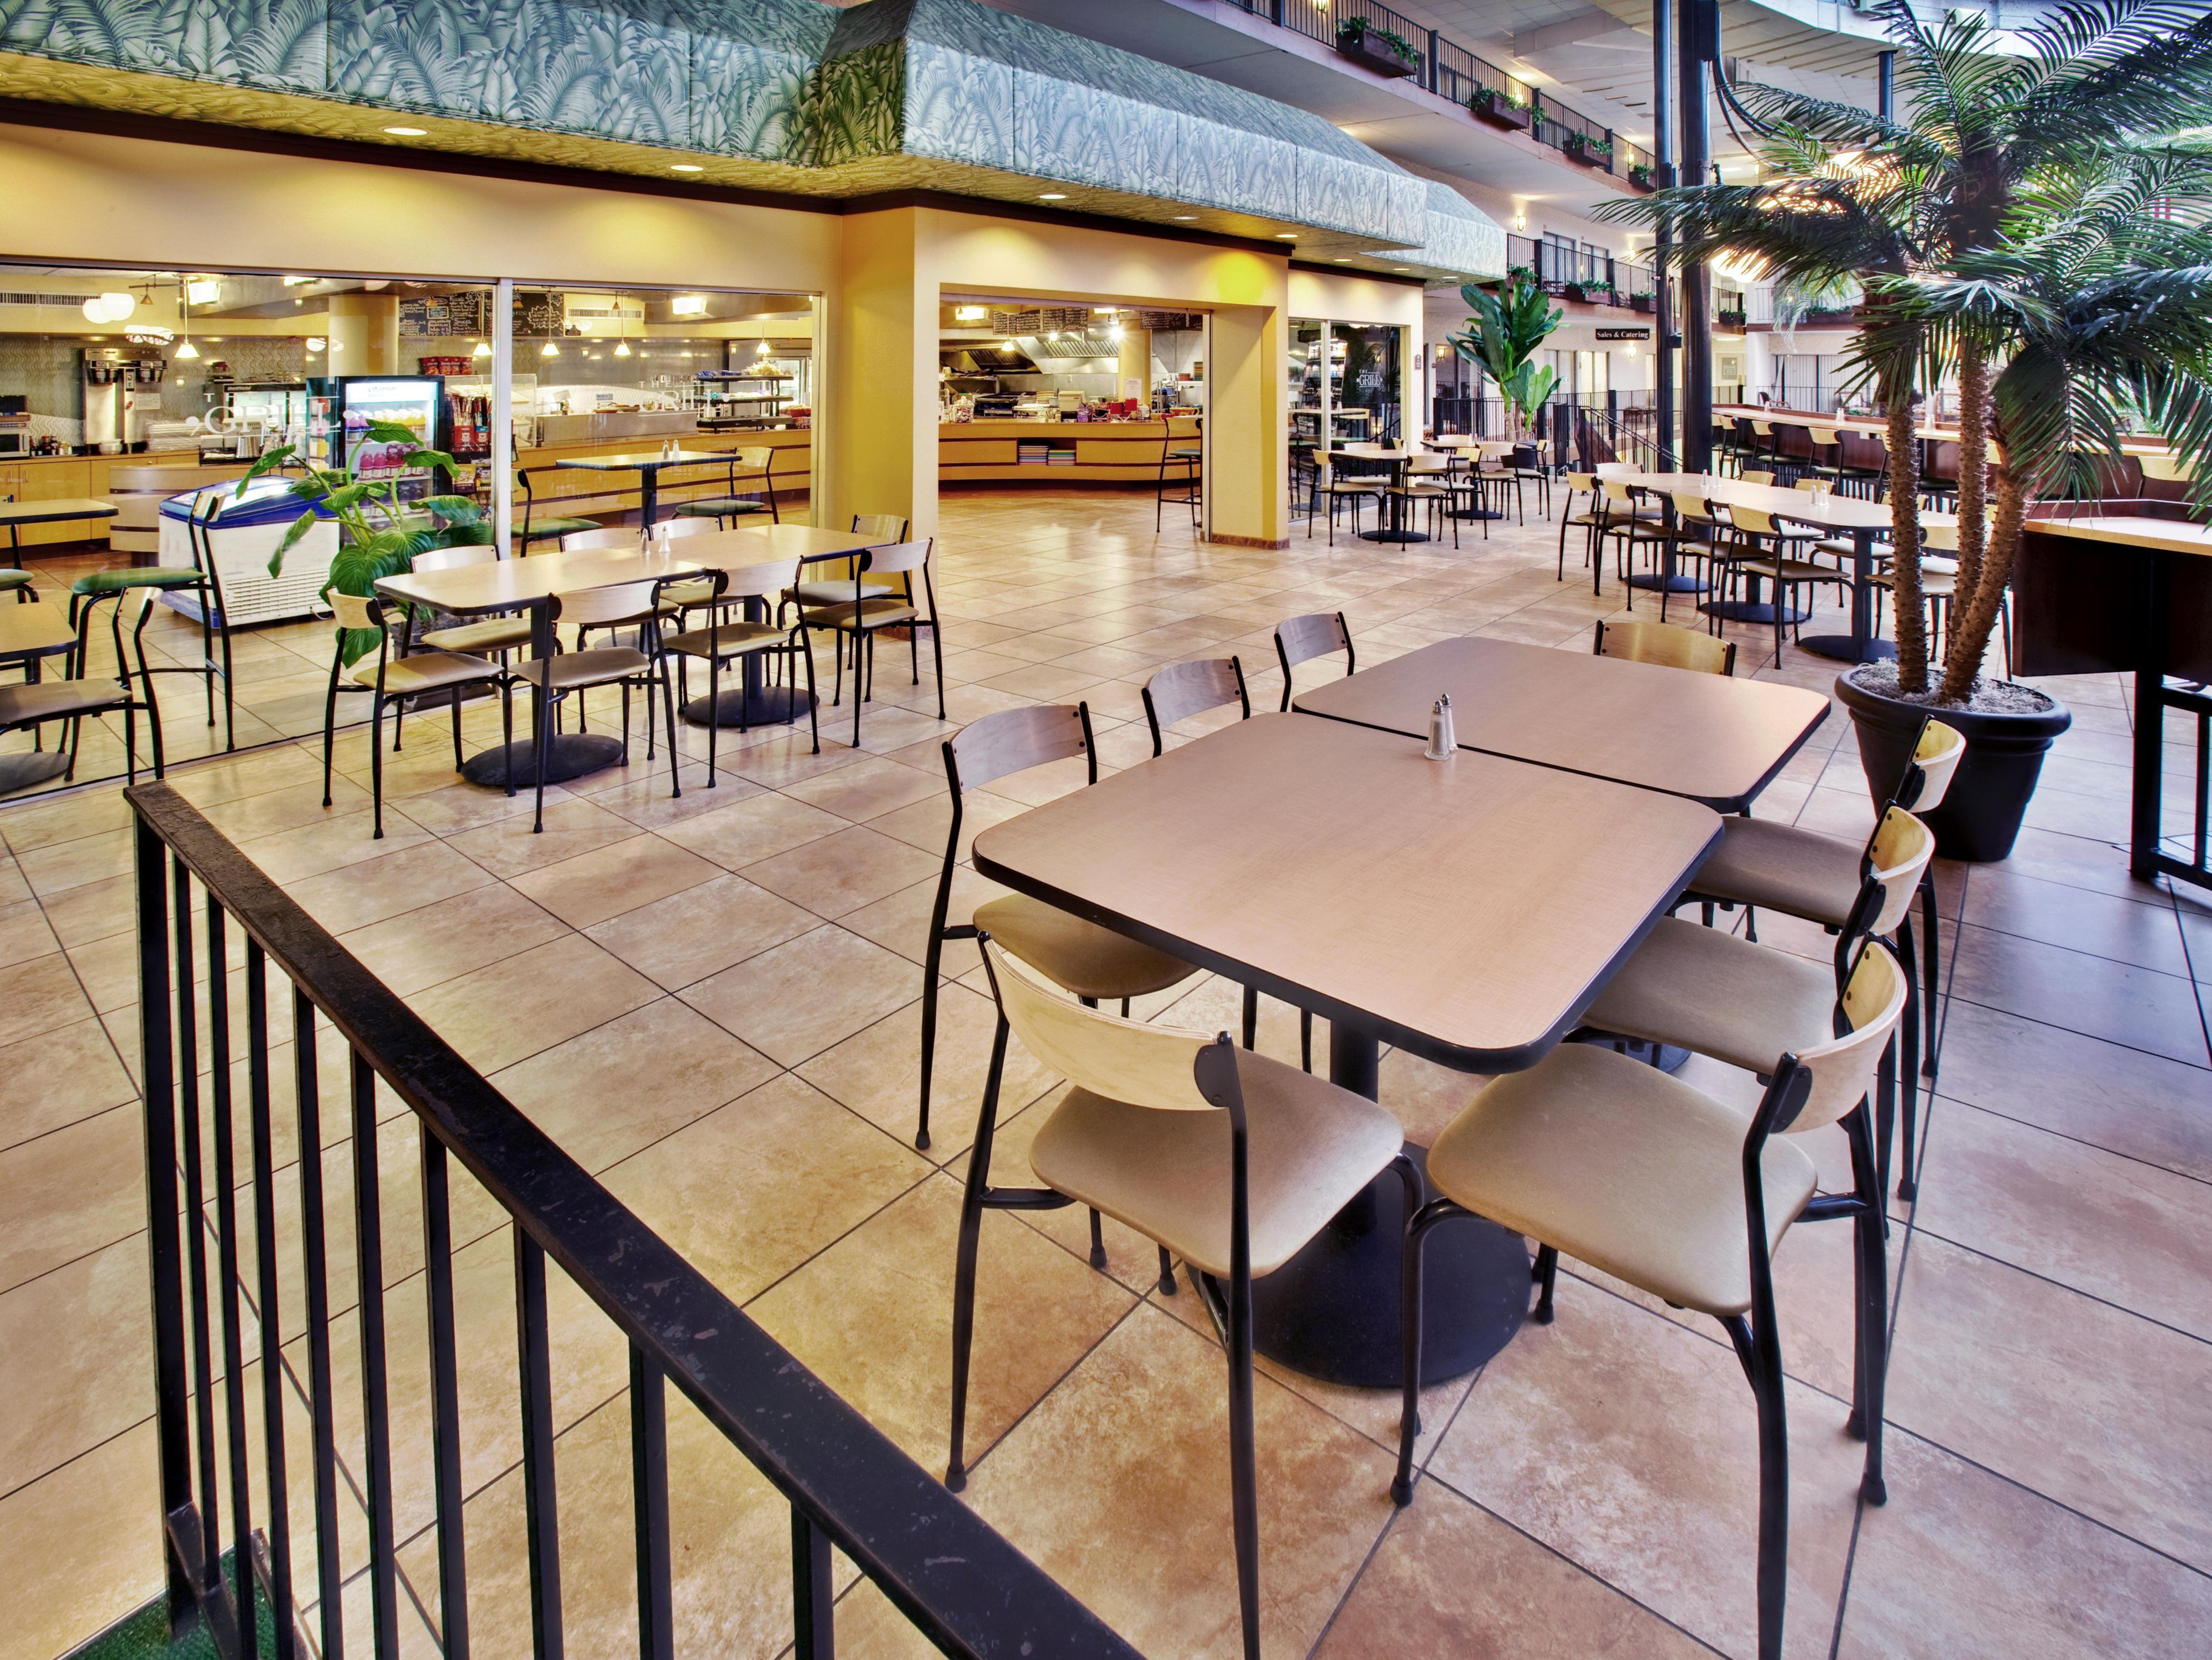 Our full-service express restaurant serves a wide variety of breakfast choices, sandwiches, salads, steaks, and pasta in a comfortable setting. Relax and enjoy your meal overlooking our Courtyard. We also offer a coffee bar featuring coffees, espresso, and smoothies.